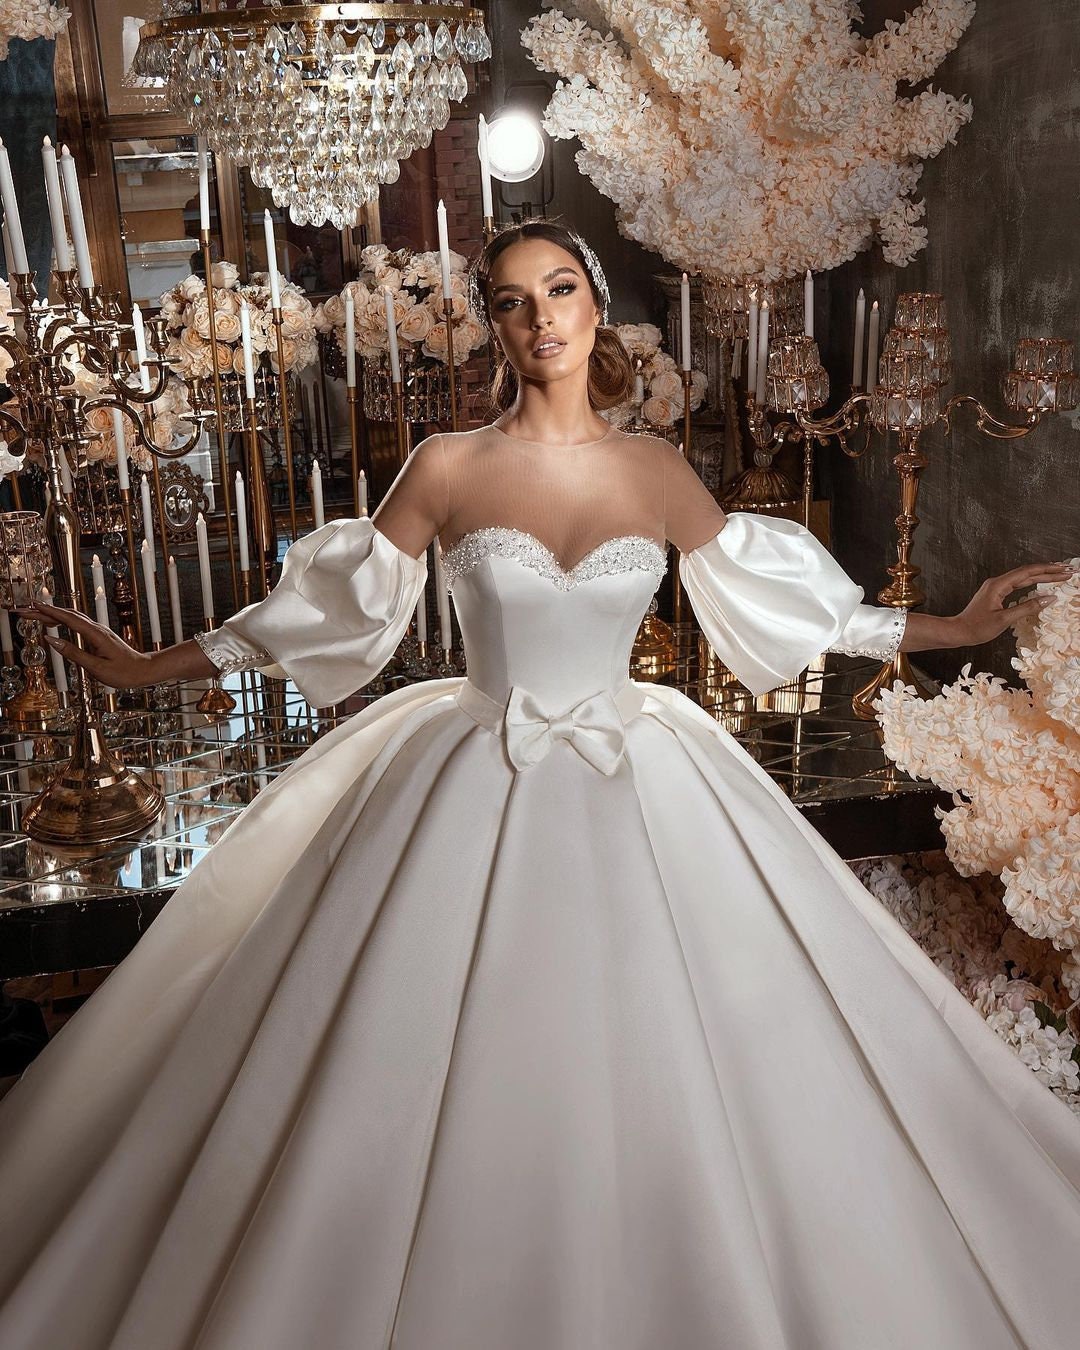 Buy ScelleBridal 2020 Gorgeous Strapless Crystal Long Sleeve Ball Gown  Wedding Dress White 14 at Amazon.in